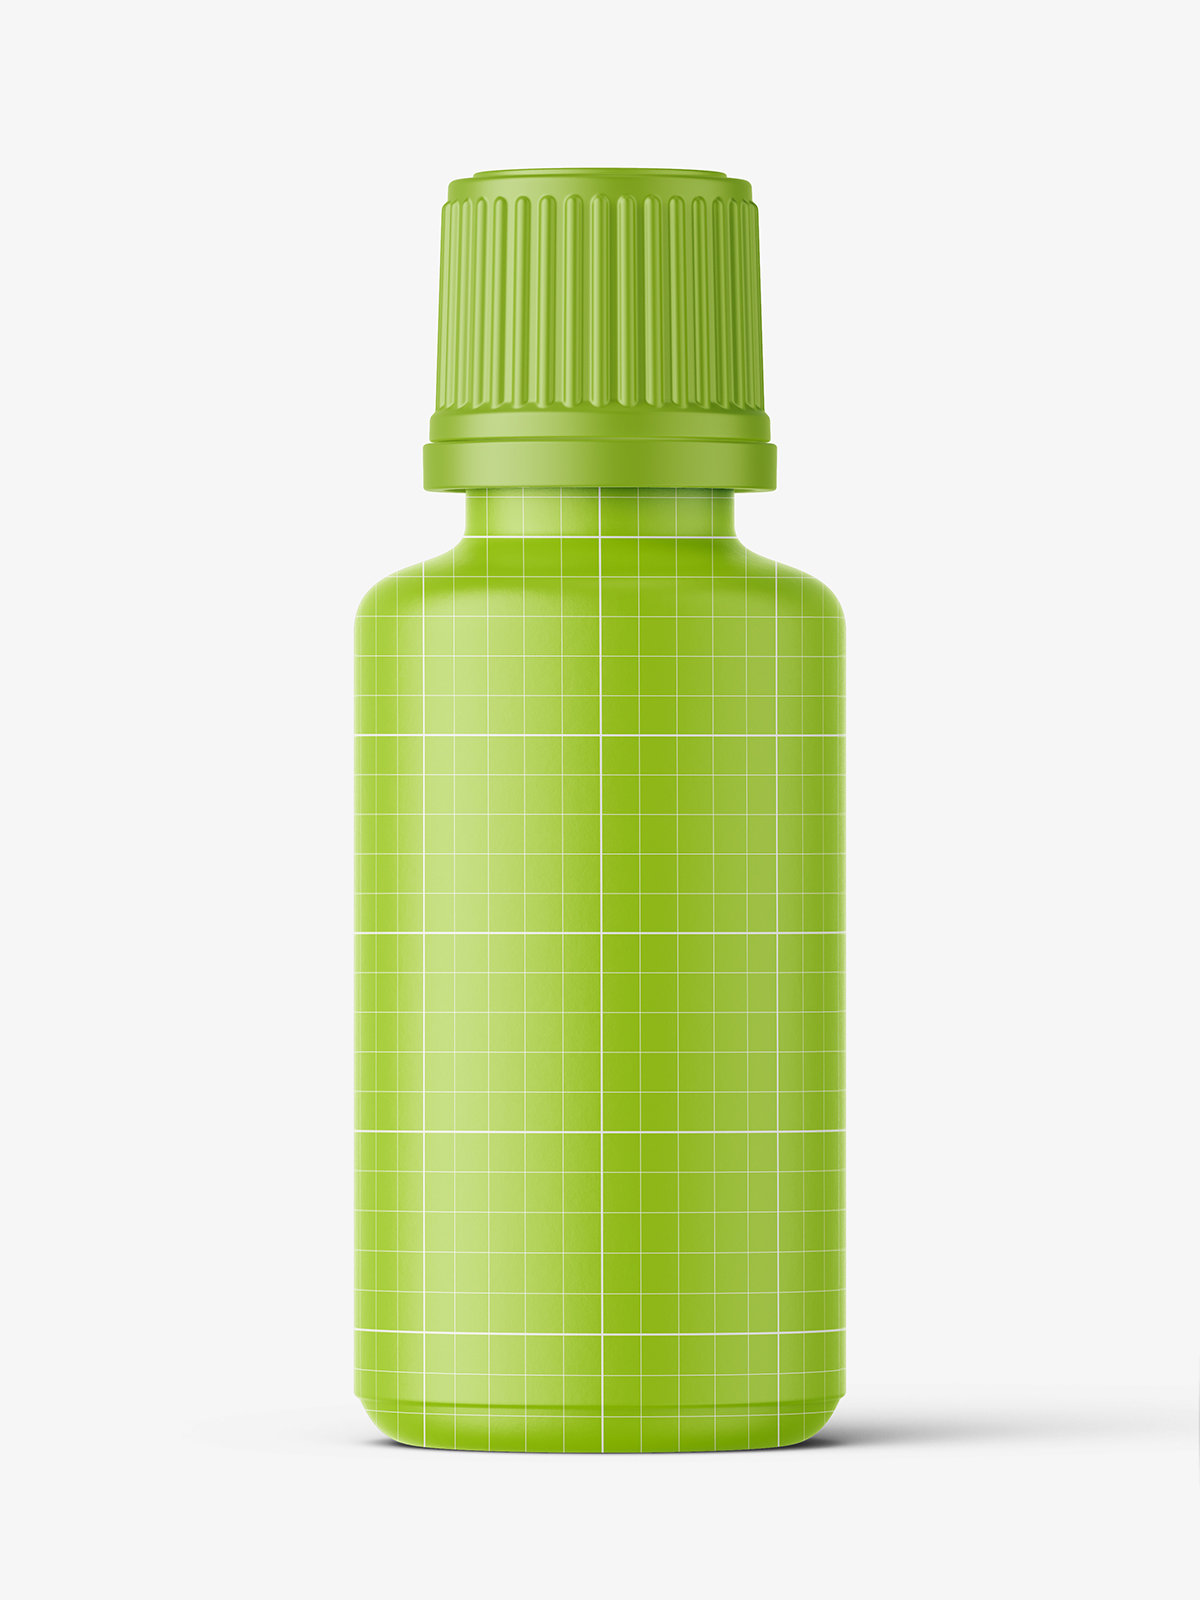 Download Clear Bottle With Pills Mockup 30 Ml Smarty Mockups